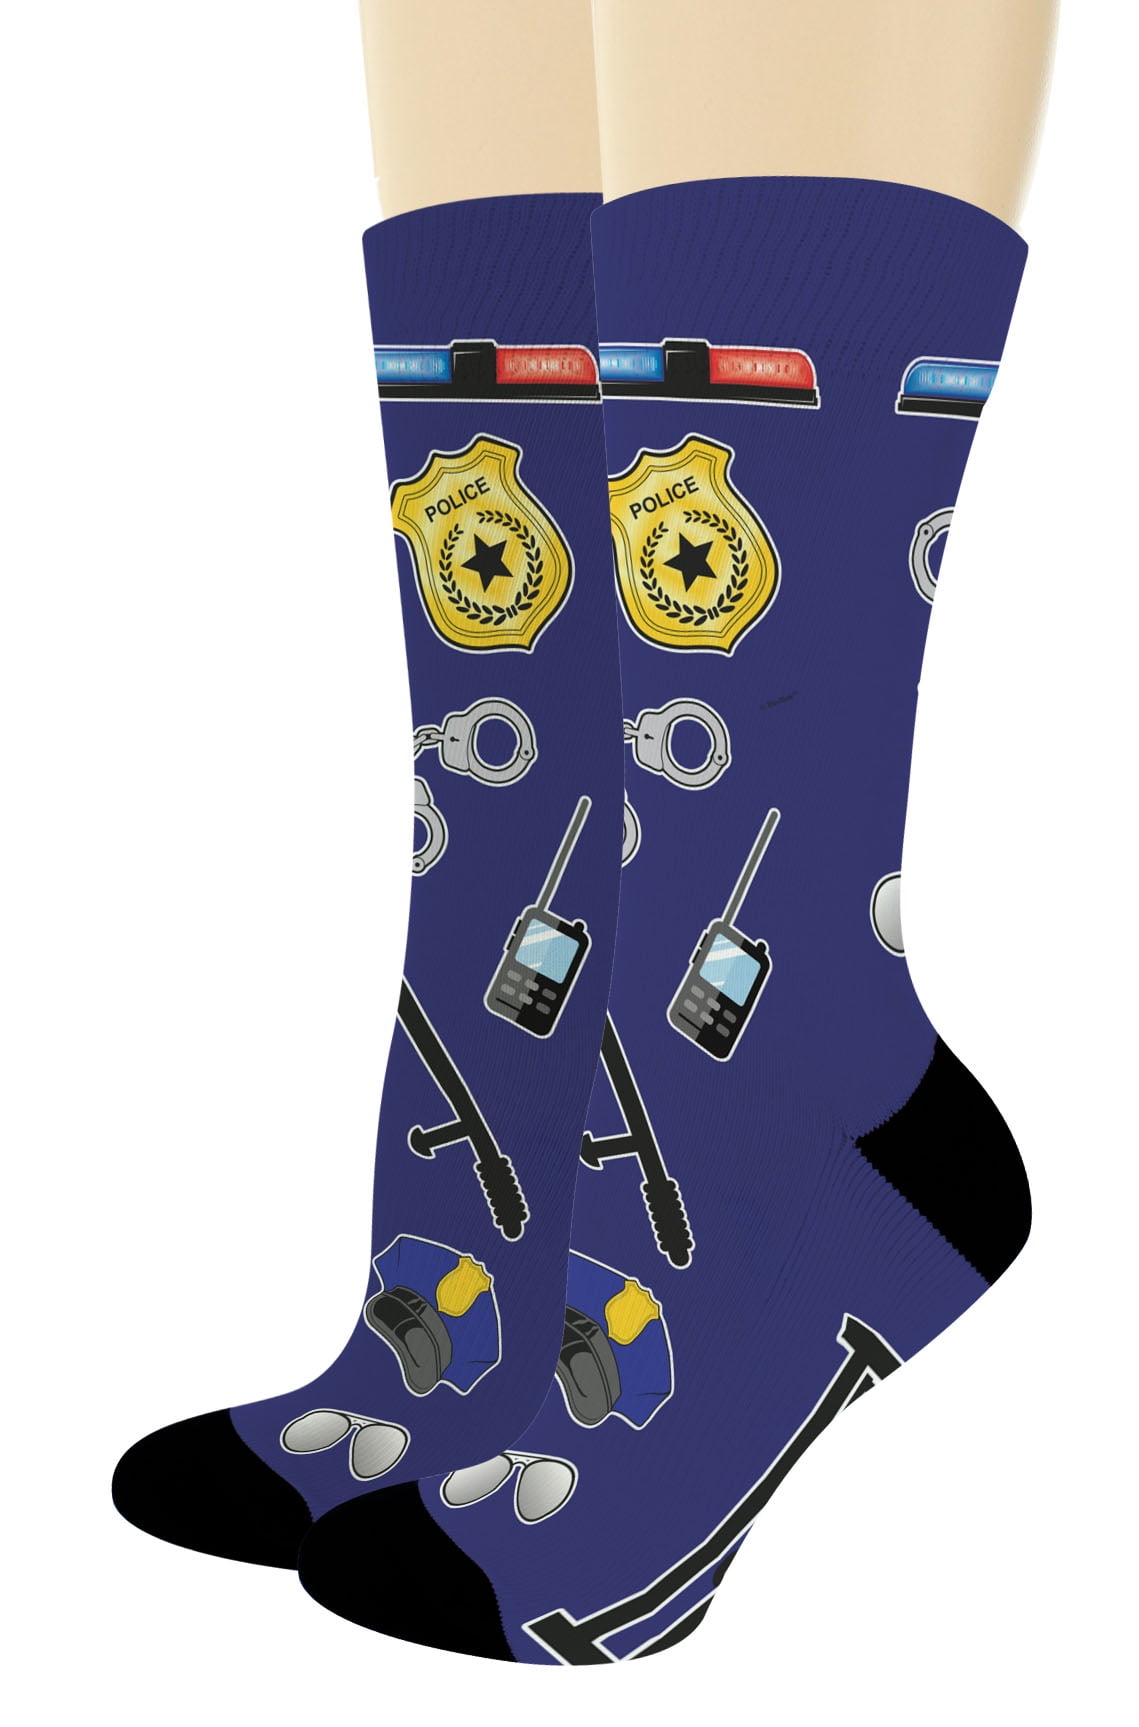 Men's Cops Socks, Policeman Gifts for Him, Gift for Cops, Police Officers, Police Academy Graduations, Police Detective Gifts, Police Retirement Gifts